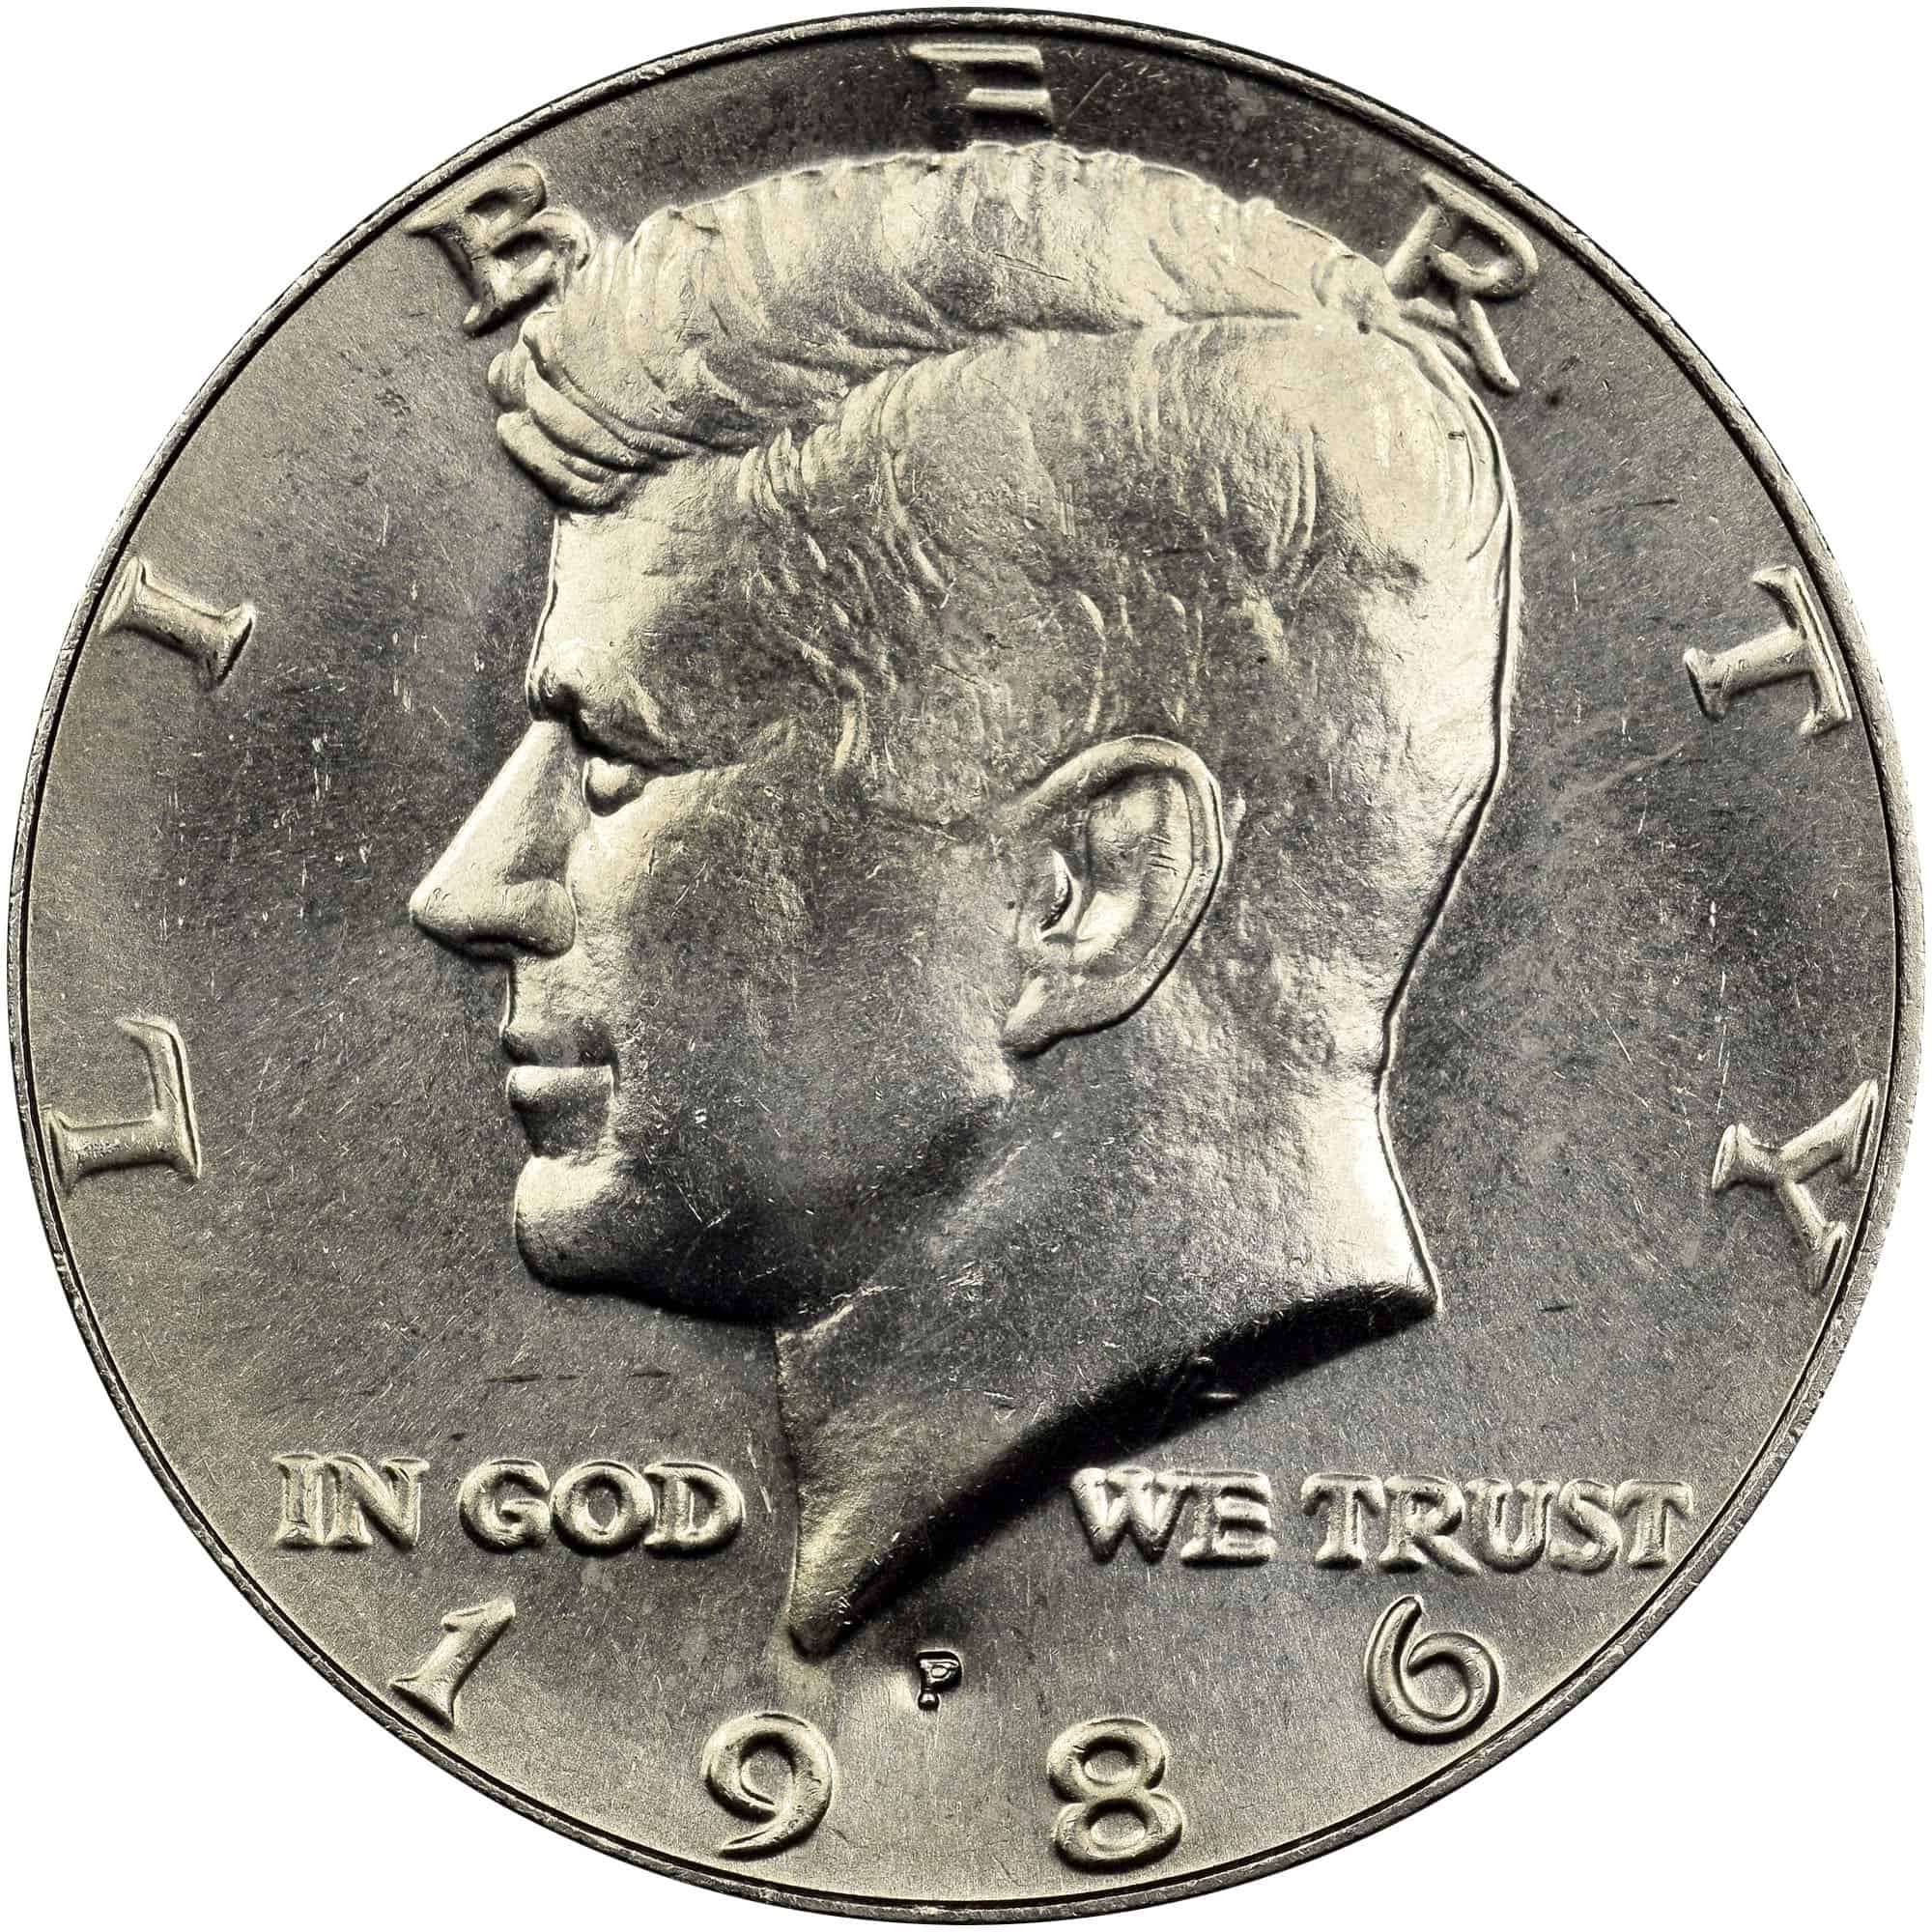 The obverse of the 1986 Kennedy half-dollar